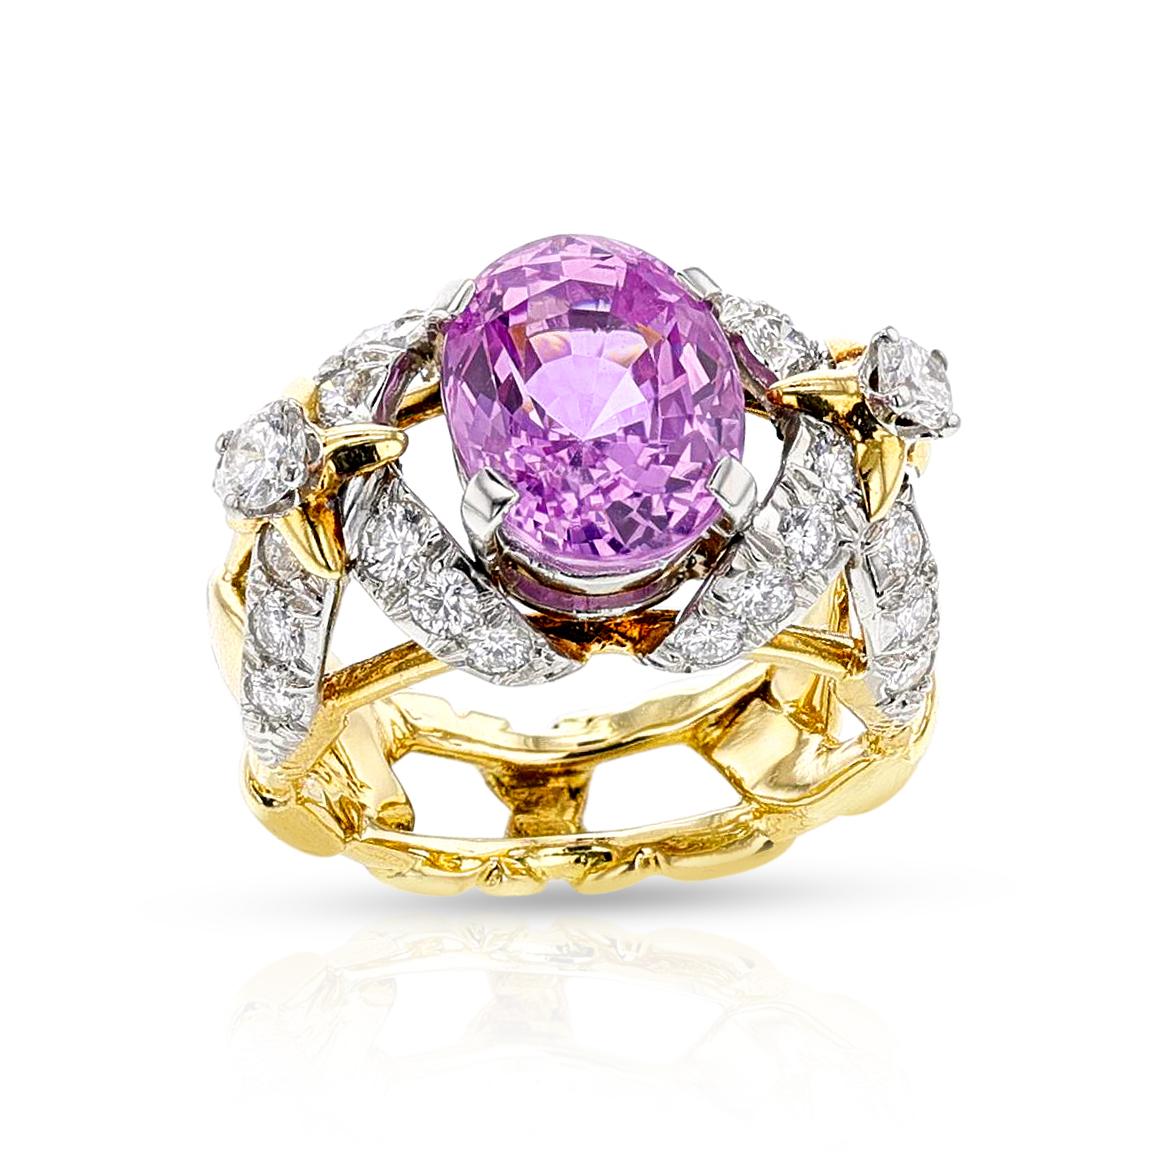 A rare and remarkable ring by Jean Schlumberger, prong-set with a beautiful and fine-quality oval-shaped mixed-cut pink sapphire, accented with round brilliant-cut diamonds set in the classic woven gold work. The ring is signed and marked ‘Tiffany &